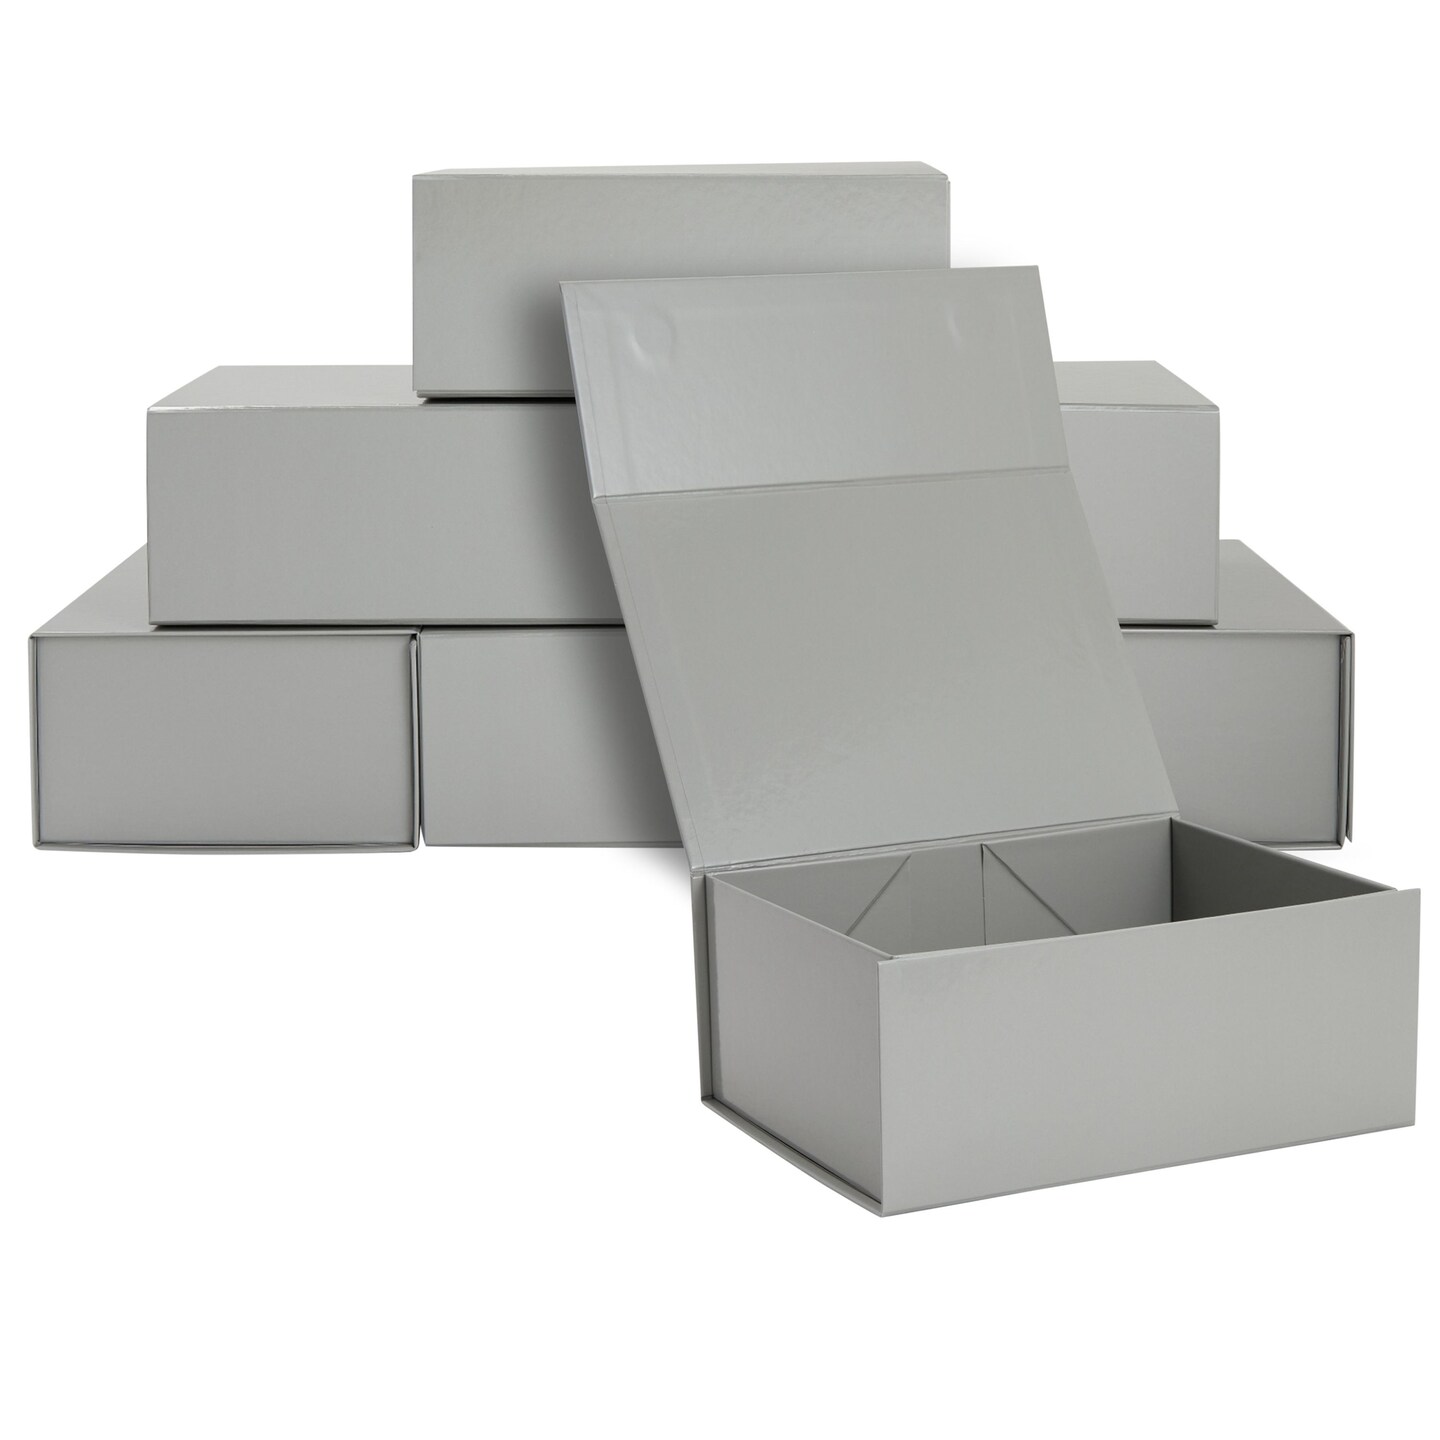 6 Pack Magnetic Gift Boxes with Lids, 9.5 x 7 x 4 Inches for Birthday, Wedding, Groomsman and Bridesmaid Proposal Box (Gray)